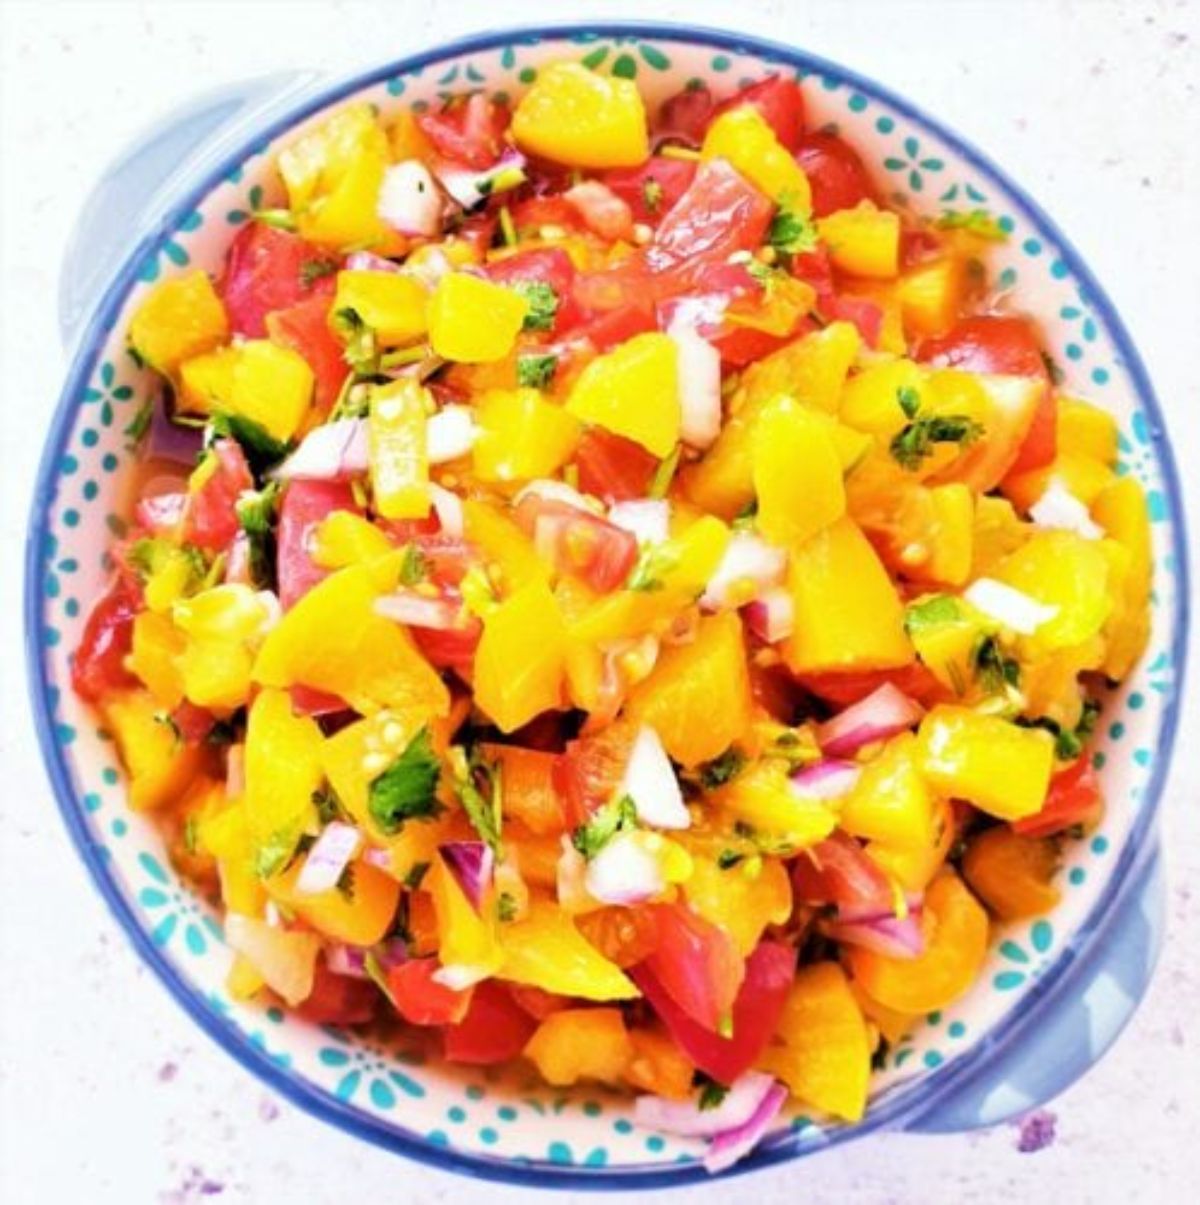 Mouth-watering peach salsa in a bowl.